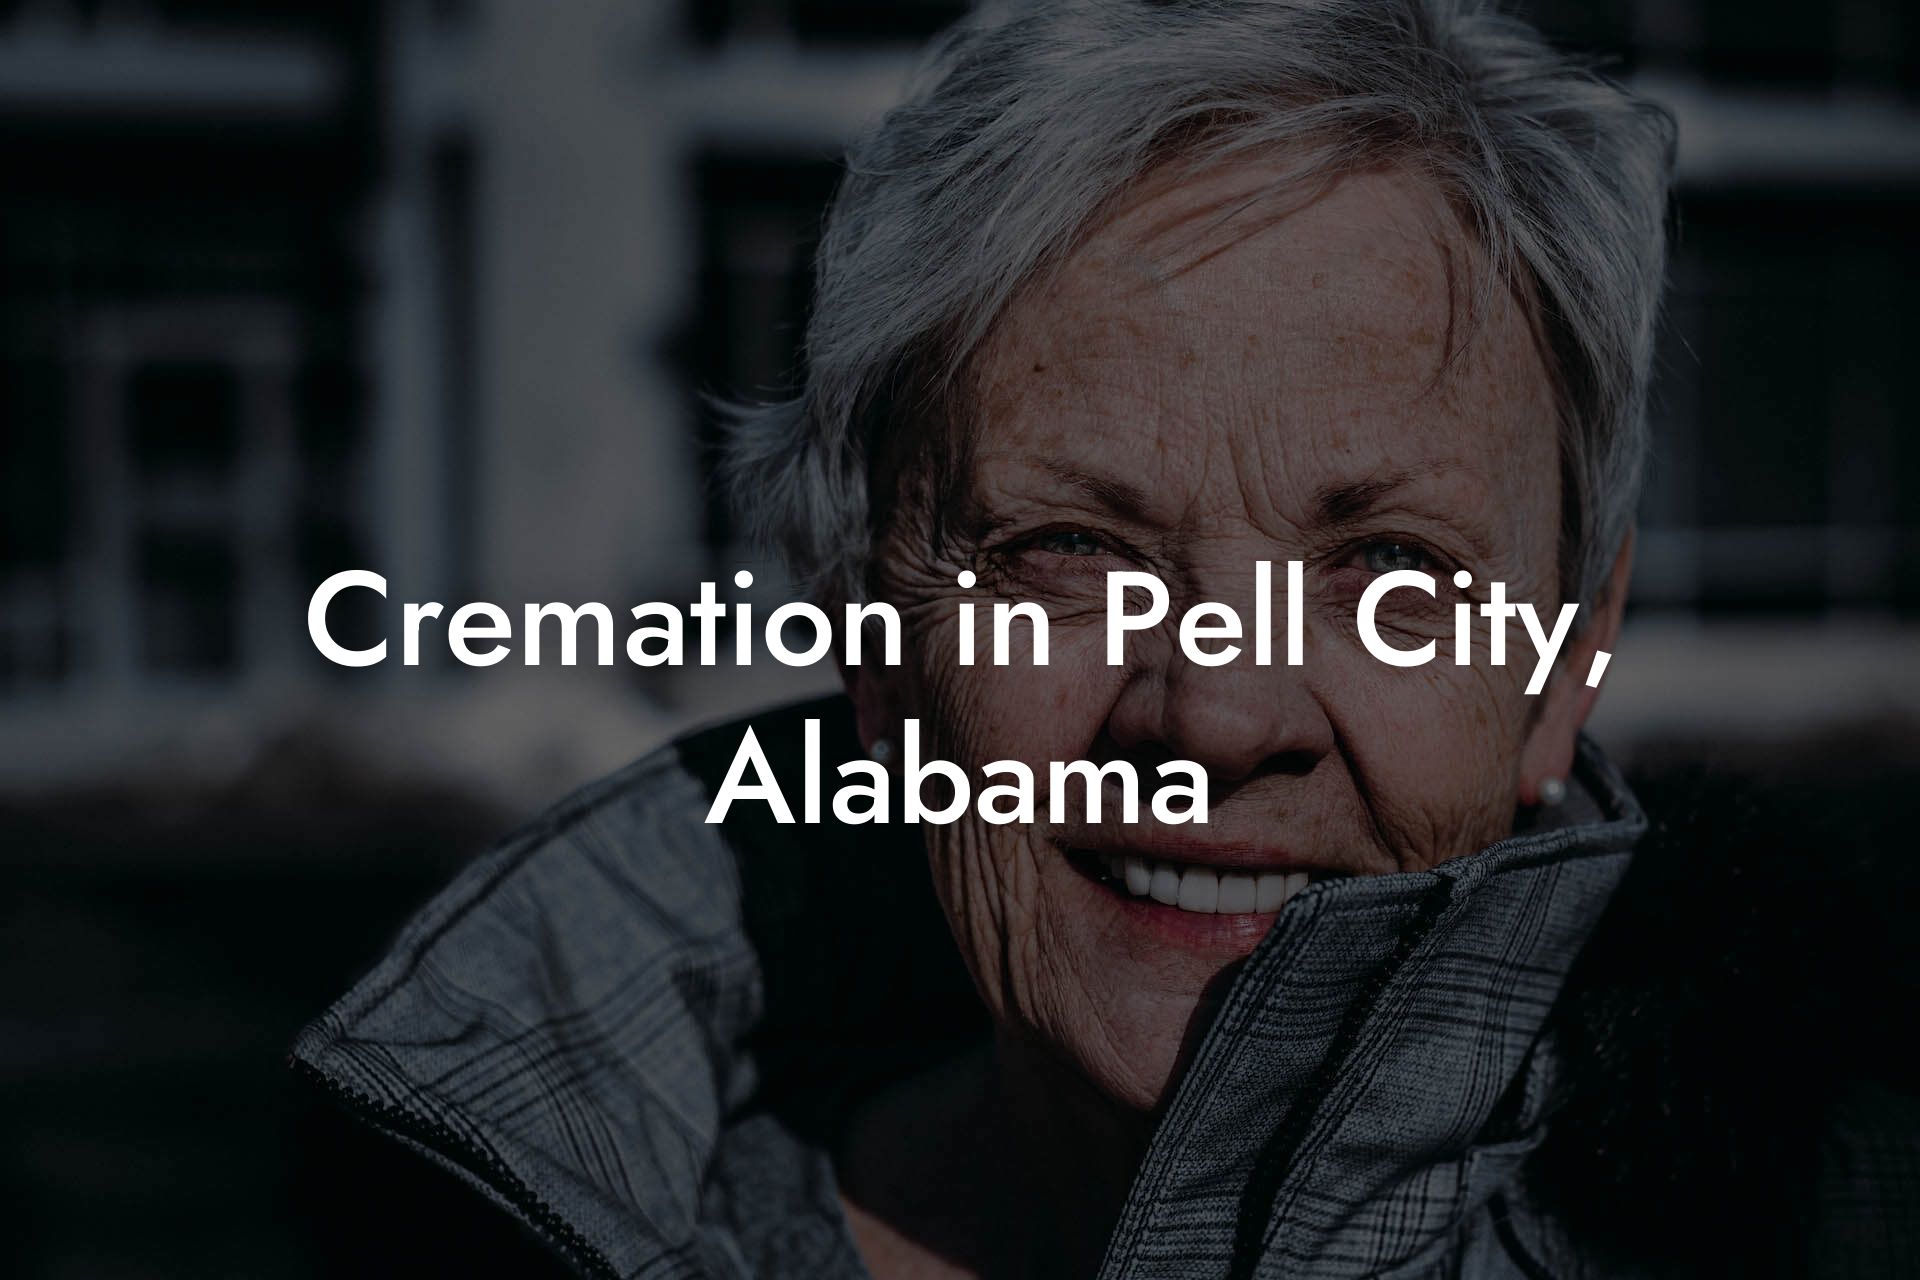 Cremation in Pell City, Alabama